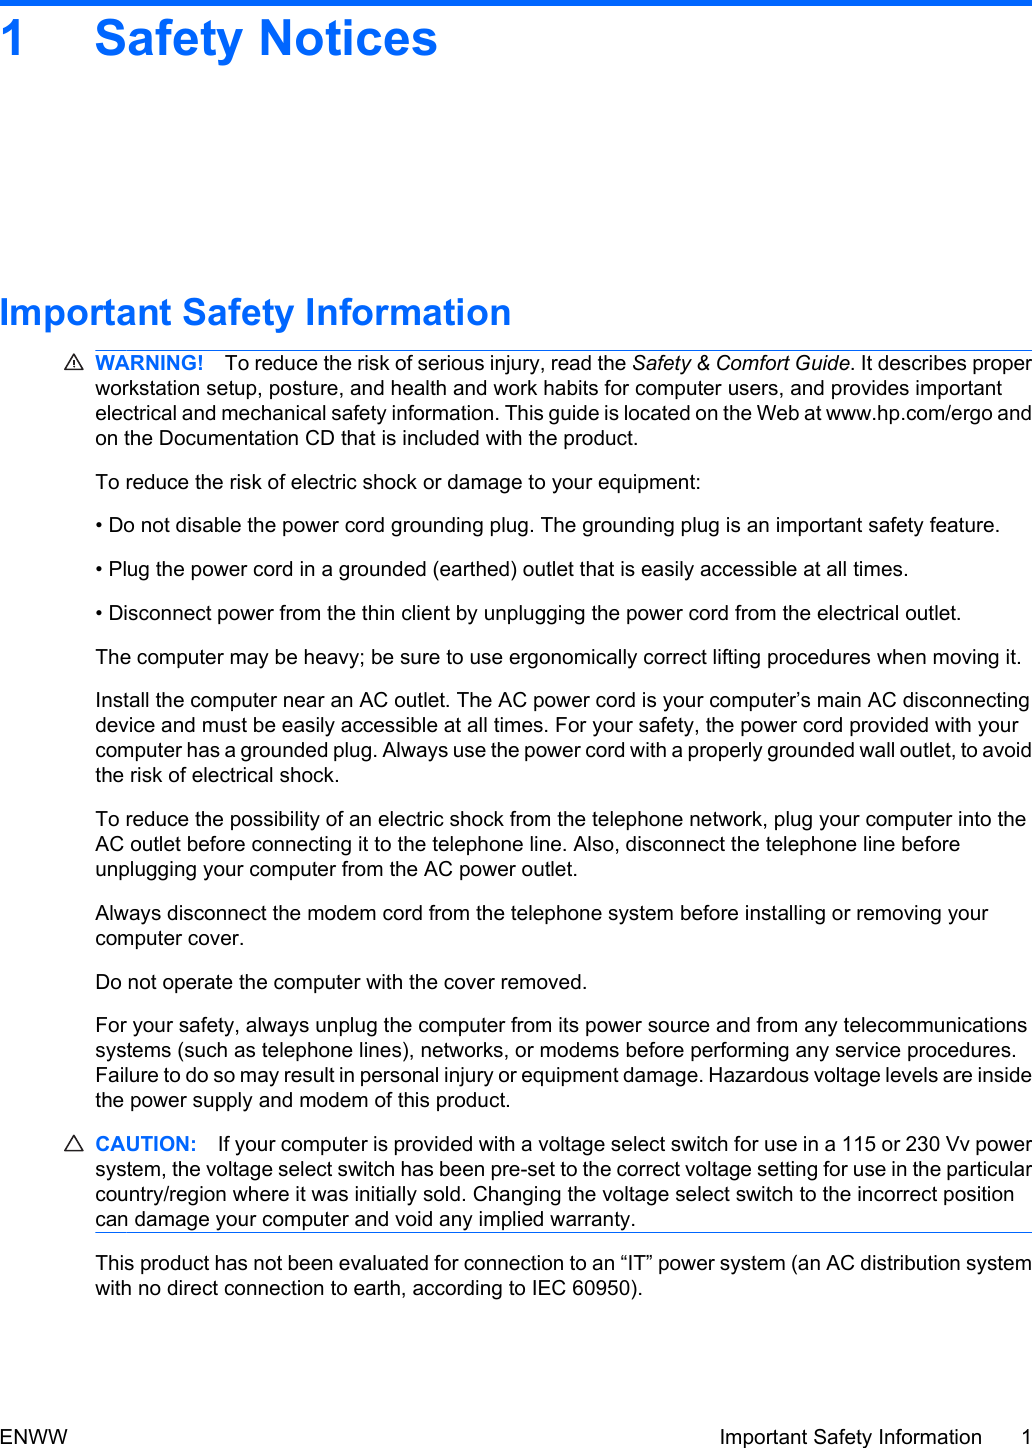 1 Safety NoticesImportant Safety InformationWARNING! To reduce the risk of serious injury, read the Safety &amp; Comfort Guide. It describes properworkstation setup, posture, and health and work habits for computer users, and provides importantelectrical and mechanical safety information. This guide is located on the Web at www.hp.com/ergo andon the Documentation CD that is included with the product.To reduce the risk of electric shock or damage to your equipment:• Do not disable the power cord grounding plug. The grounding plug is an important safety feature.• Plug the power cord in a grounded (earthed) outlet that is easily accessible at all times.• Disconnect power from the thin client by unplugging the power cord from the electrical outlet.The computer may be heavy; be sure to use ergonomically correct lifting procedures when moving it.Install the computer near an AC outlet. The AC power cord is your computer’s main AC disconnectingdevice and must be easily accessible at all times. For your safety, the power cord provided with yourcomputer has a grounded plug. Always use the power cord with a properly grounded wall outlet, to avoidthe risk of electrical shock.To reduce the possibility of an electric shock from the telephone network, plug your computer into theAC outlet before connecting it to the telephone line. Also, disconnect the telephone line beforeunplugging your computer from the AC power outlet.Always disconnect the modem cord from the telephone system before installing or removing yourcomputer cover.Do not operate the computer with the cover removed.For your safety, always unplug the computer from its power source and from any telecommunicationssystems (such as telephone lines), networks, or modems before performing any service procedures.Failure to do so may result in personal injury or equipment damage. Hazardous voltage levels are insidethe power supply and modem of this product.CAUTION: If your computer is provided with a voltage select switch for use in a 115 or 230 Vv powersystem, the voltage select switch has been pre-set to the correct voltage setting for use in the particularcountry/region where it was initially sold. Changing the voltage select switch to the incorrect positioncan damage your computer and void any implied warranty.This product has not been evaluated for connection to an “IT” power system (an AC distribution systemwith no direct connection to earth, according to IEC 60950).ENWW Important Safety Information 1